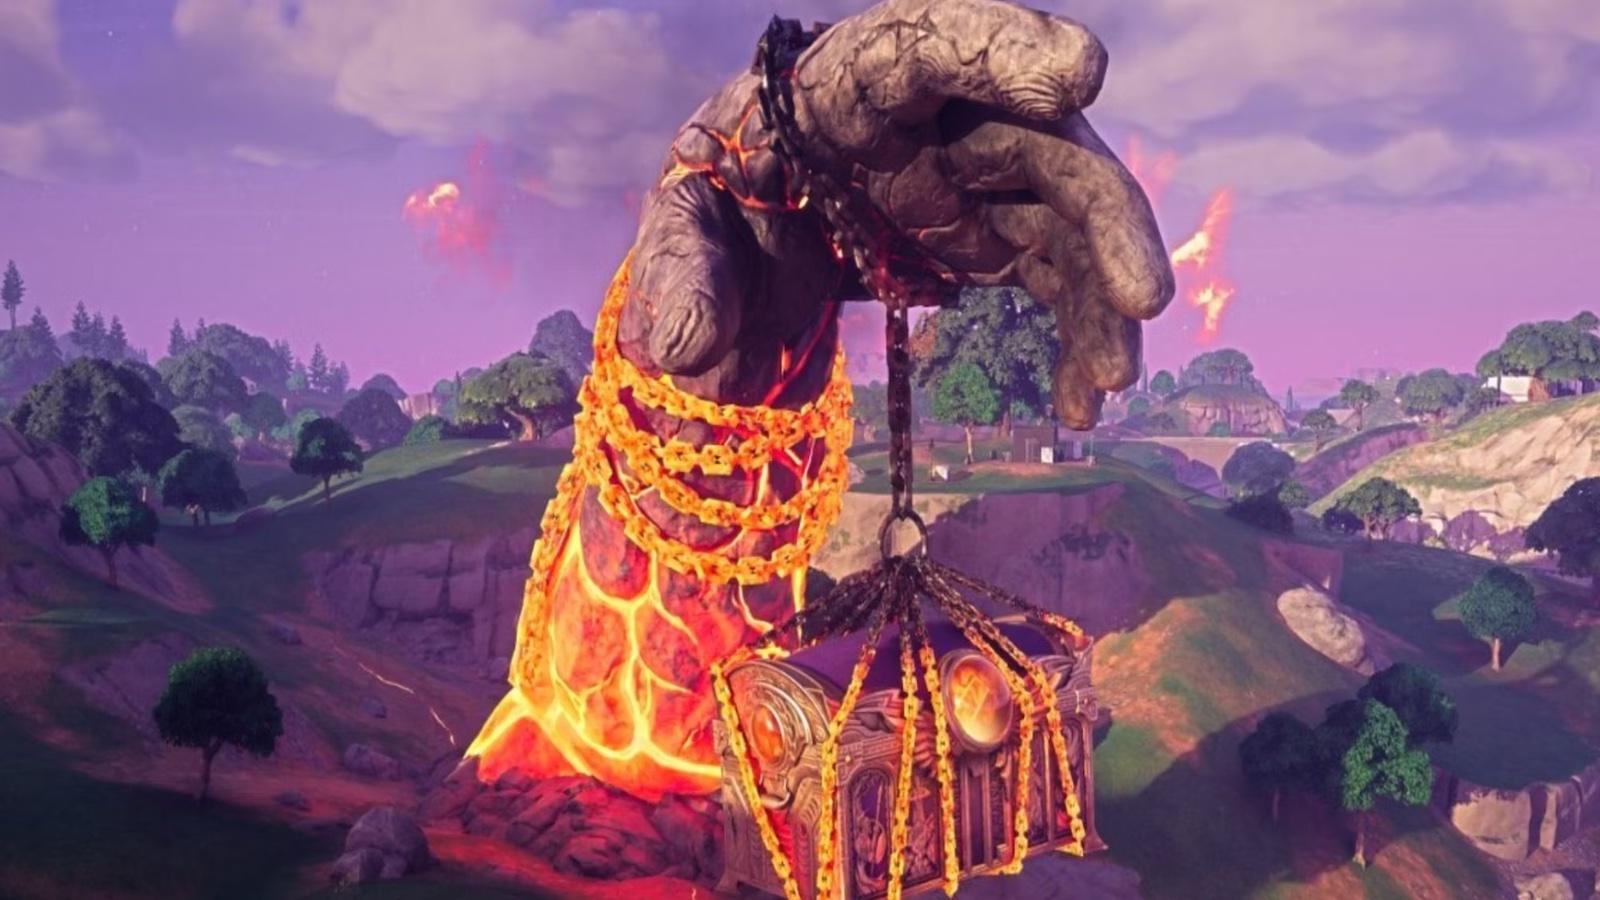 Fortnite Titan's hand coming out of ground